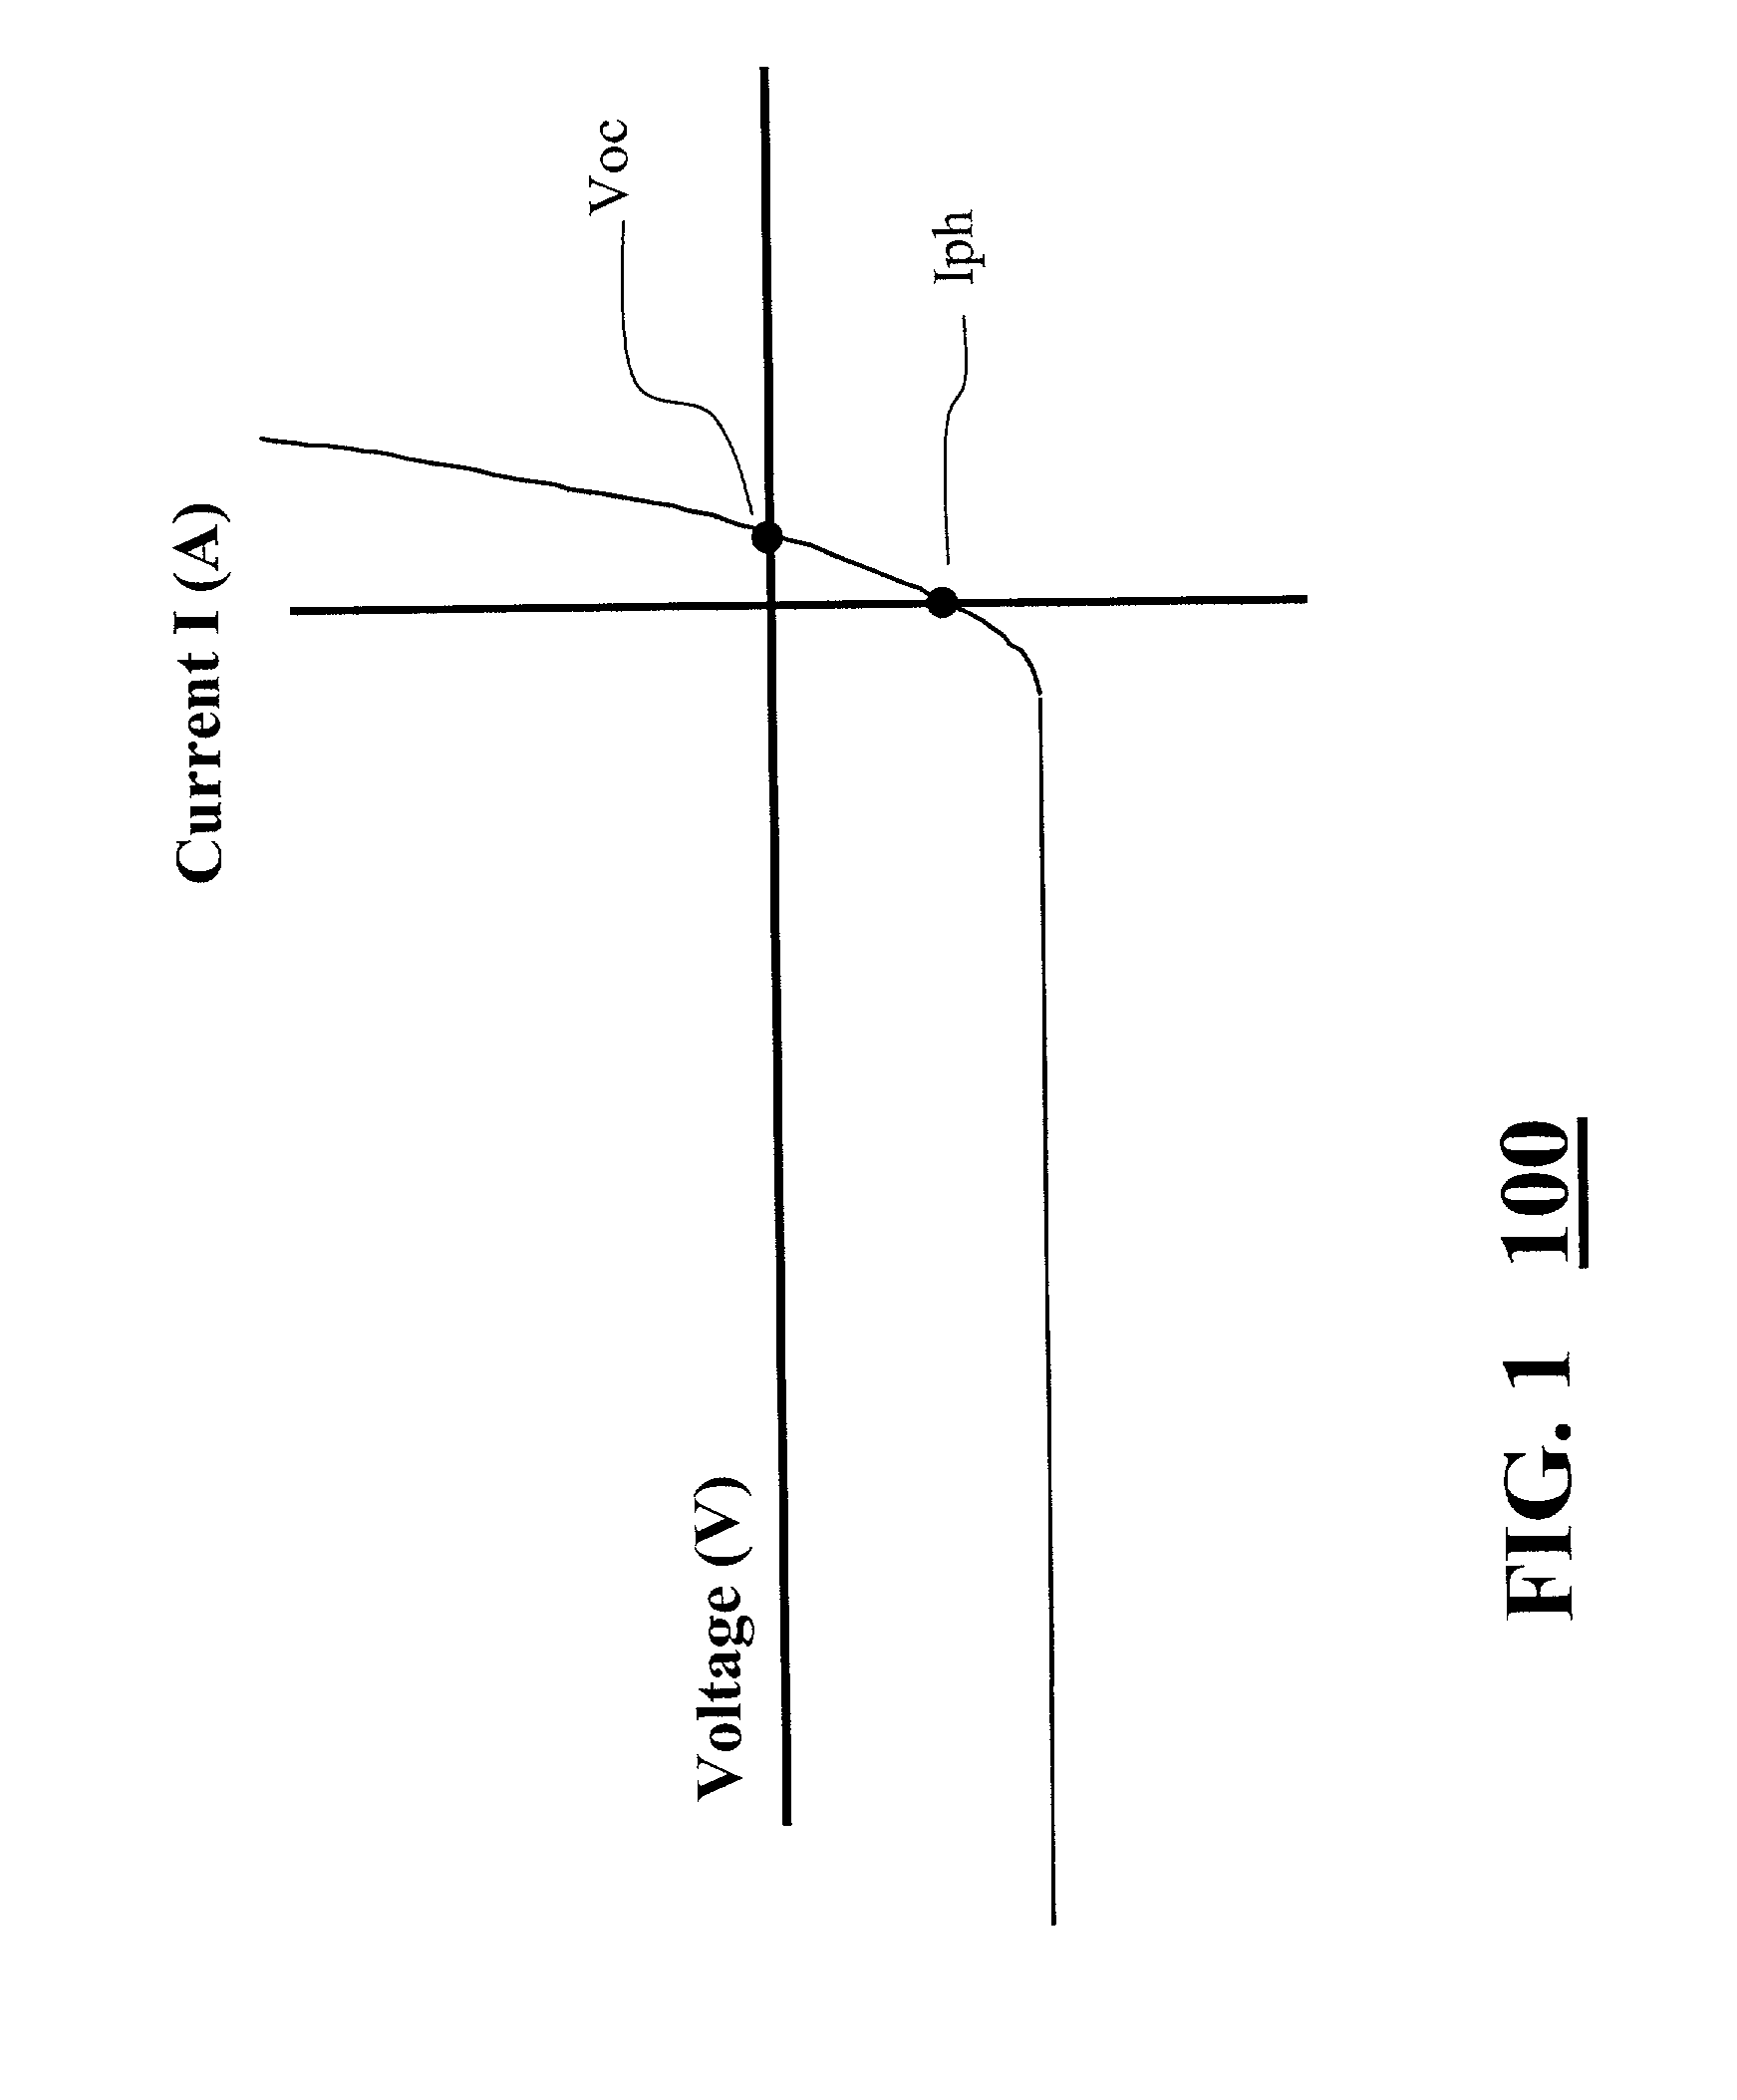 Method for determining photodiode performance parameters